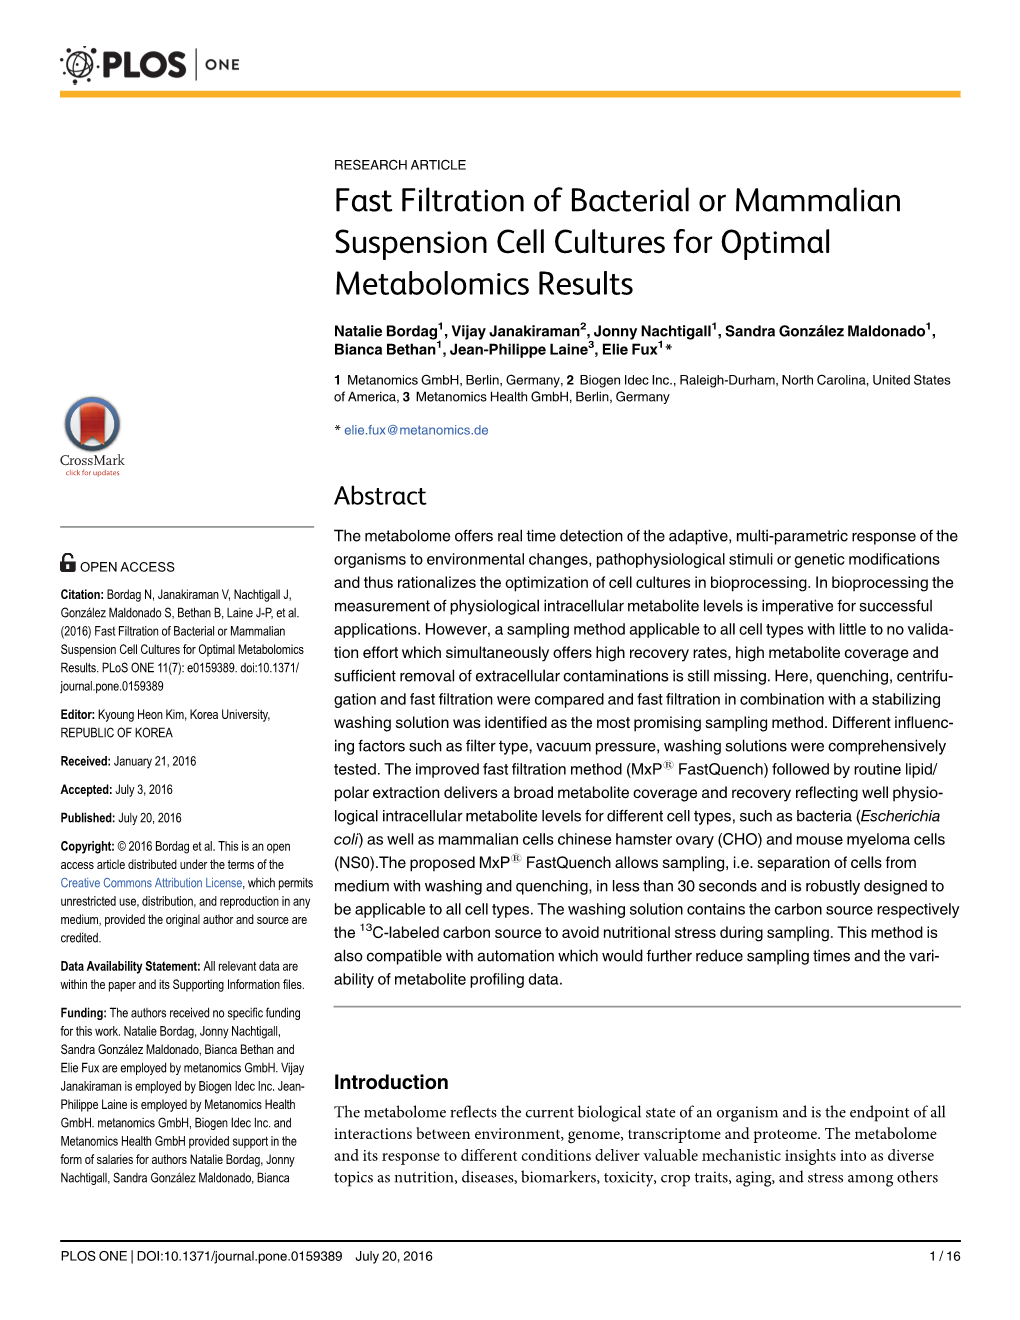 Fast Filtration of Bacterial Or Mammalian Suspension Cell Cultures for Optimal Metabolomics Results